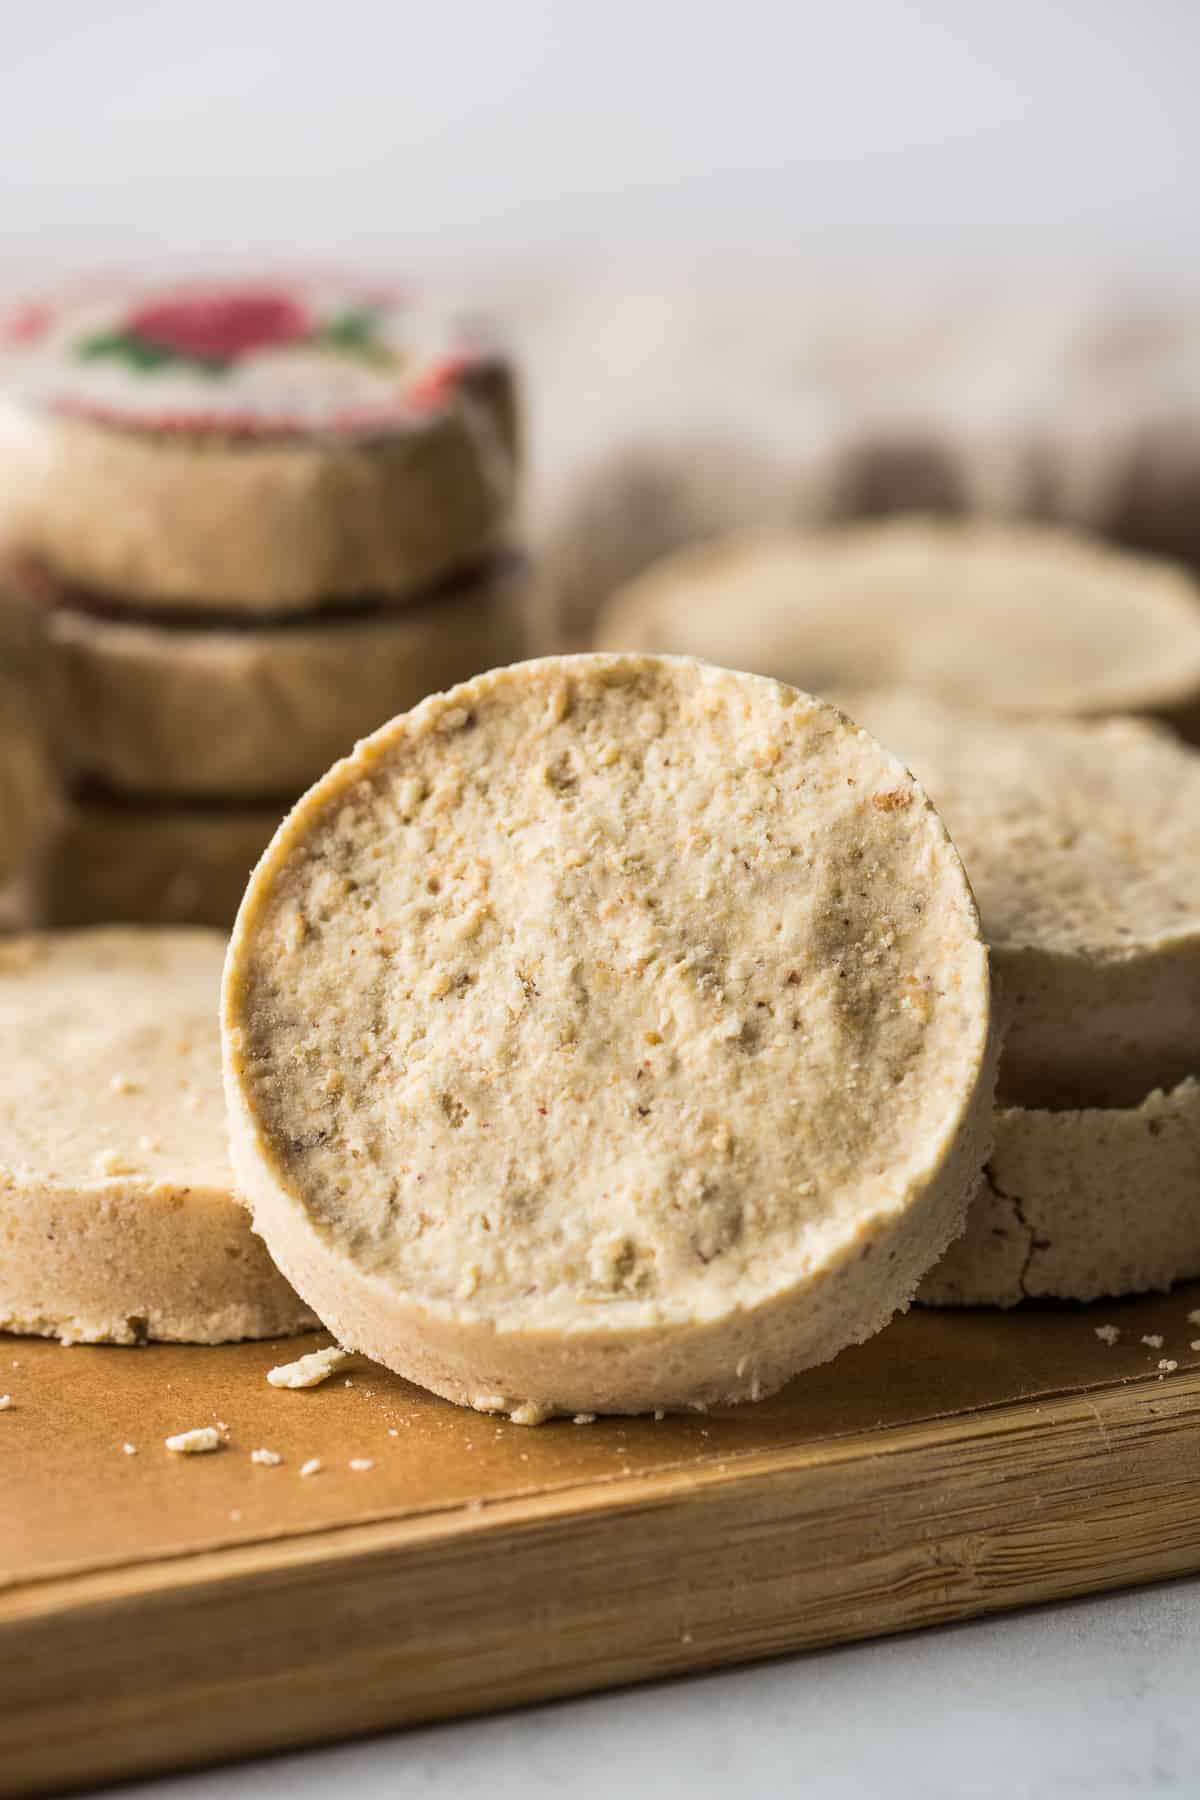 A round mazapan candy ready to eat.